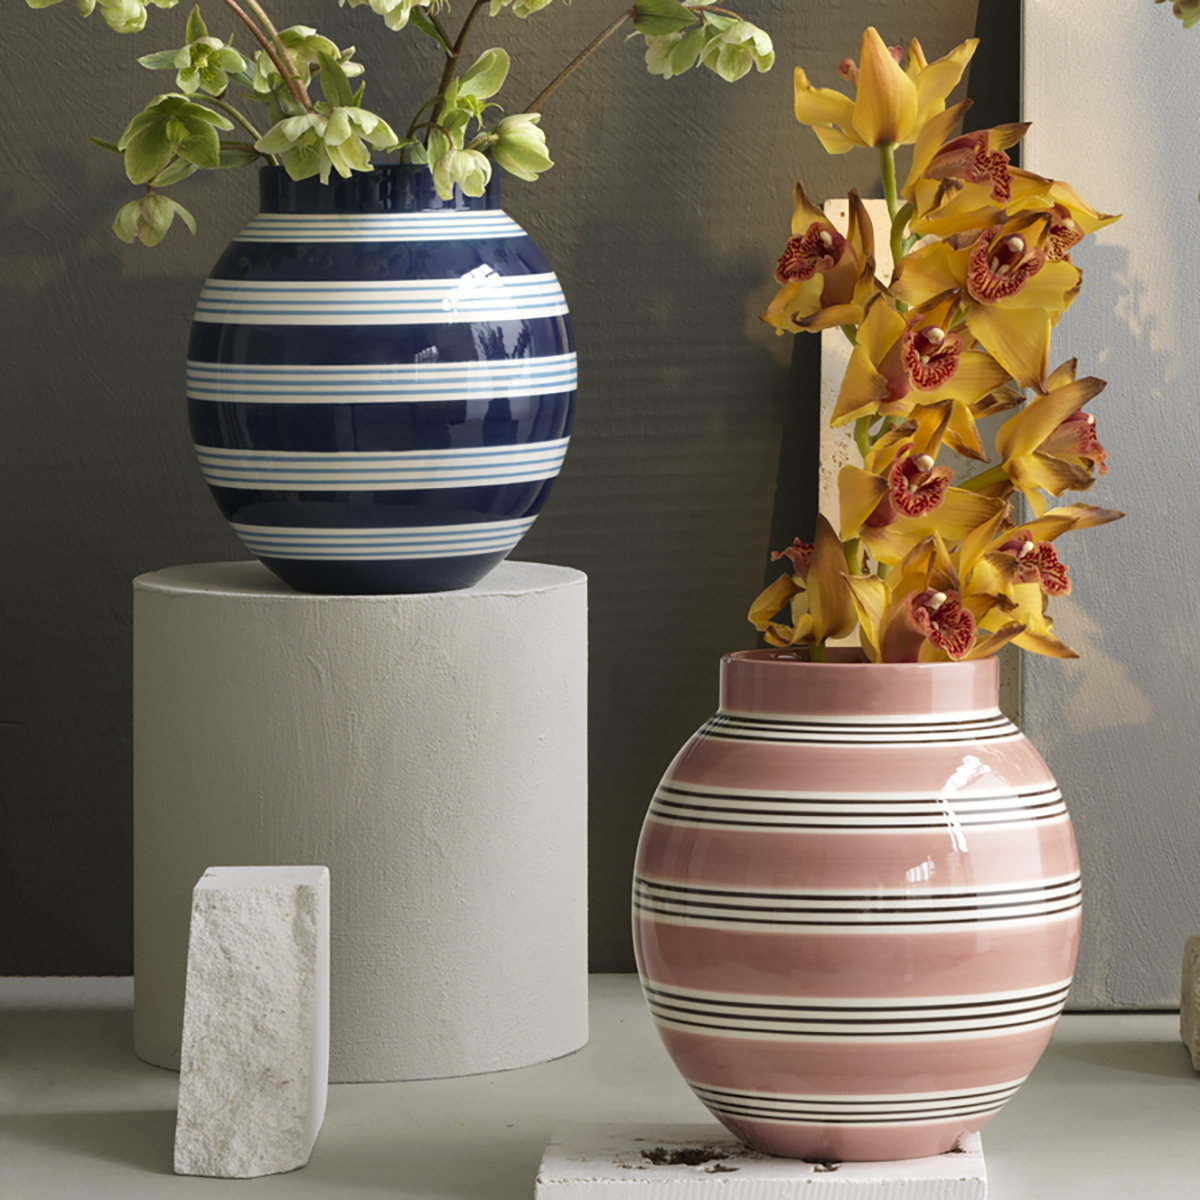 Kahler Omaggio Nuovo Vase | The Container Store